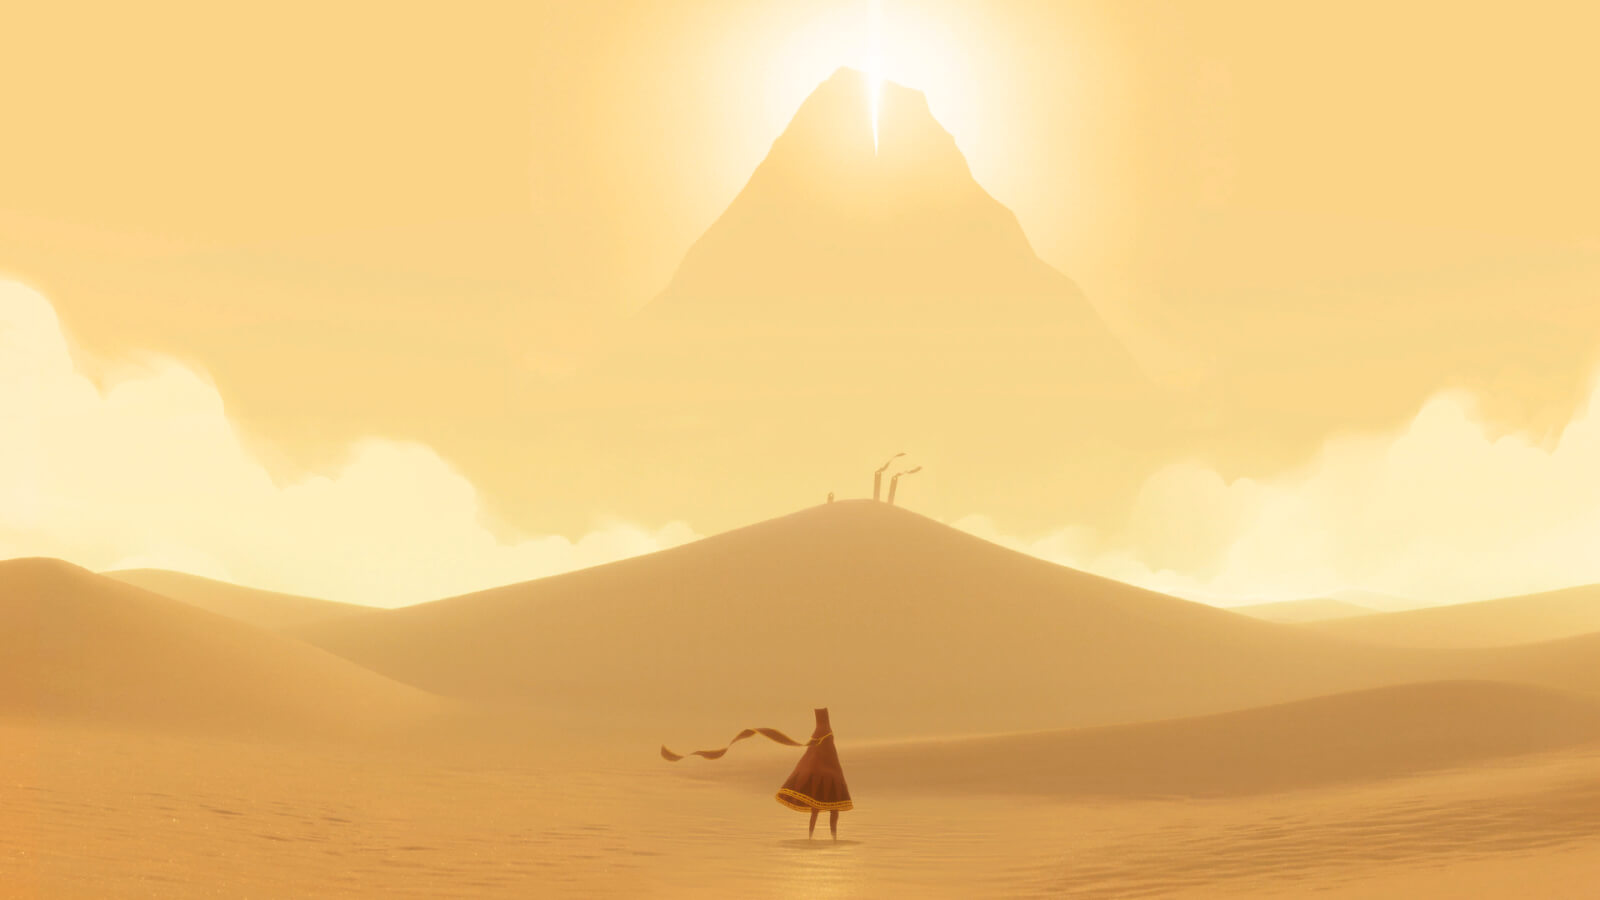 Journey is coming to PC on June 6